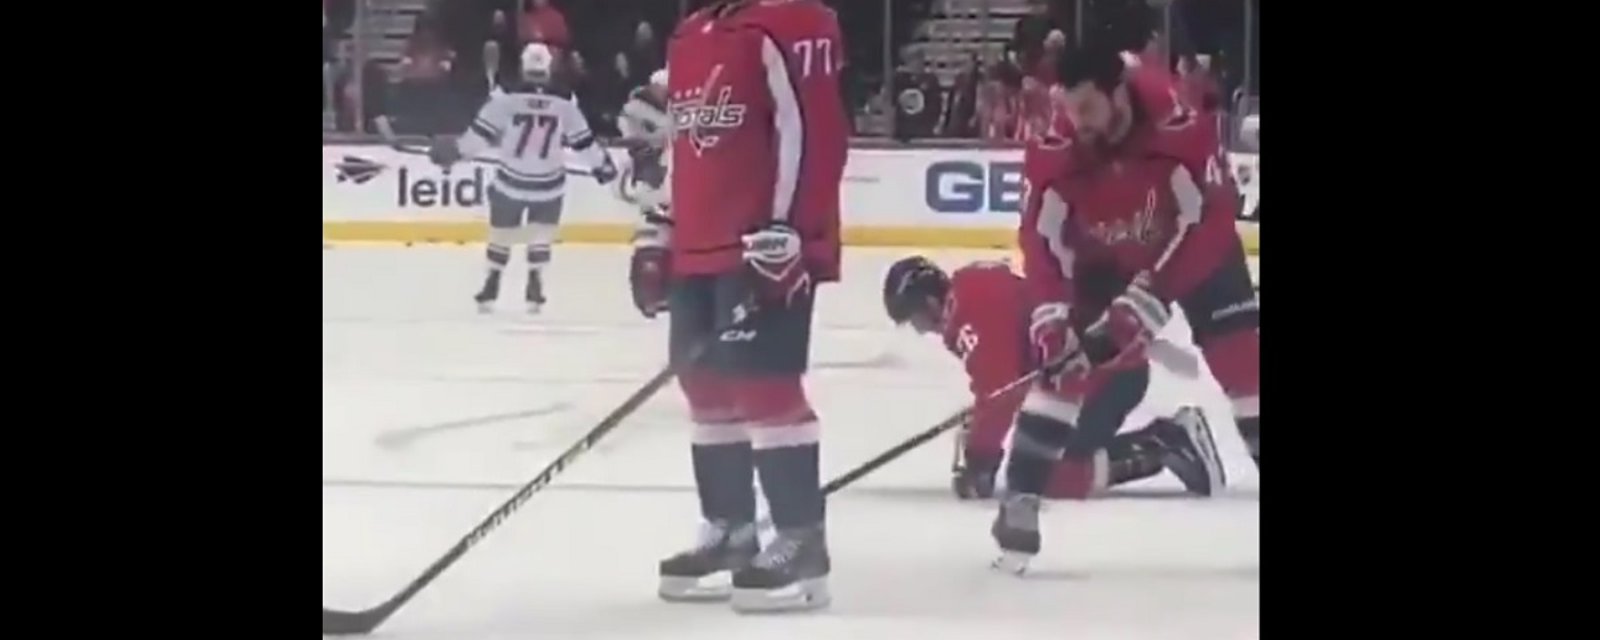 Tom Wilson gives TJ Oshie a low blow before the start of the game.